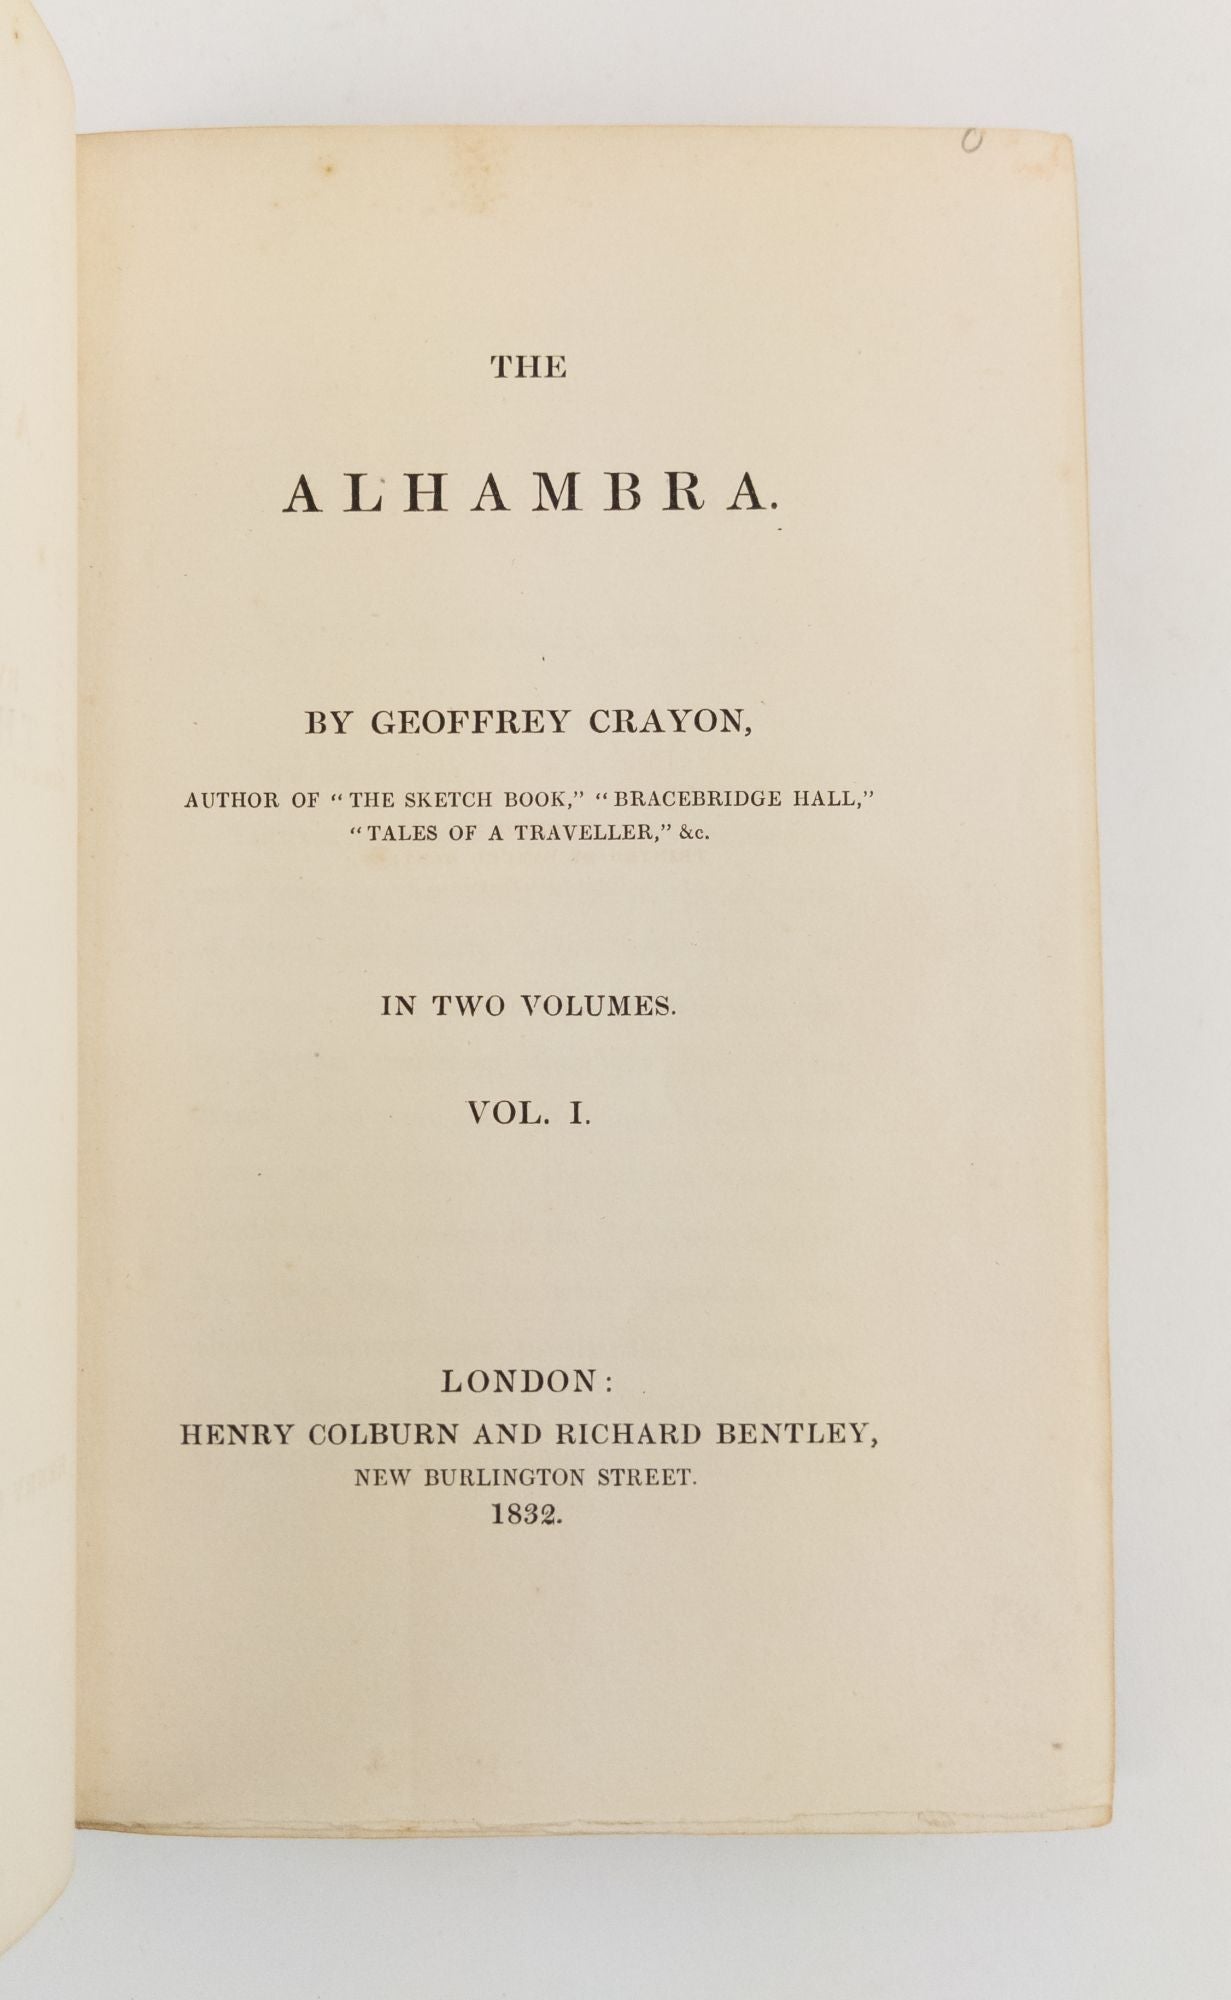 Product Image for THE ALHAMBRA [TWO VOLUMES]